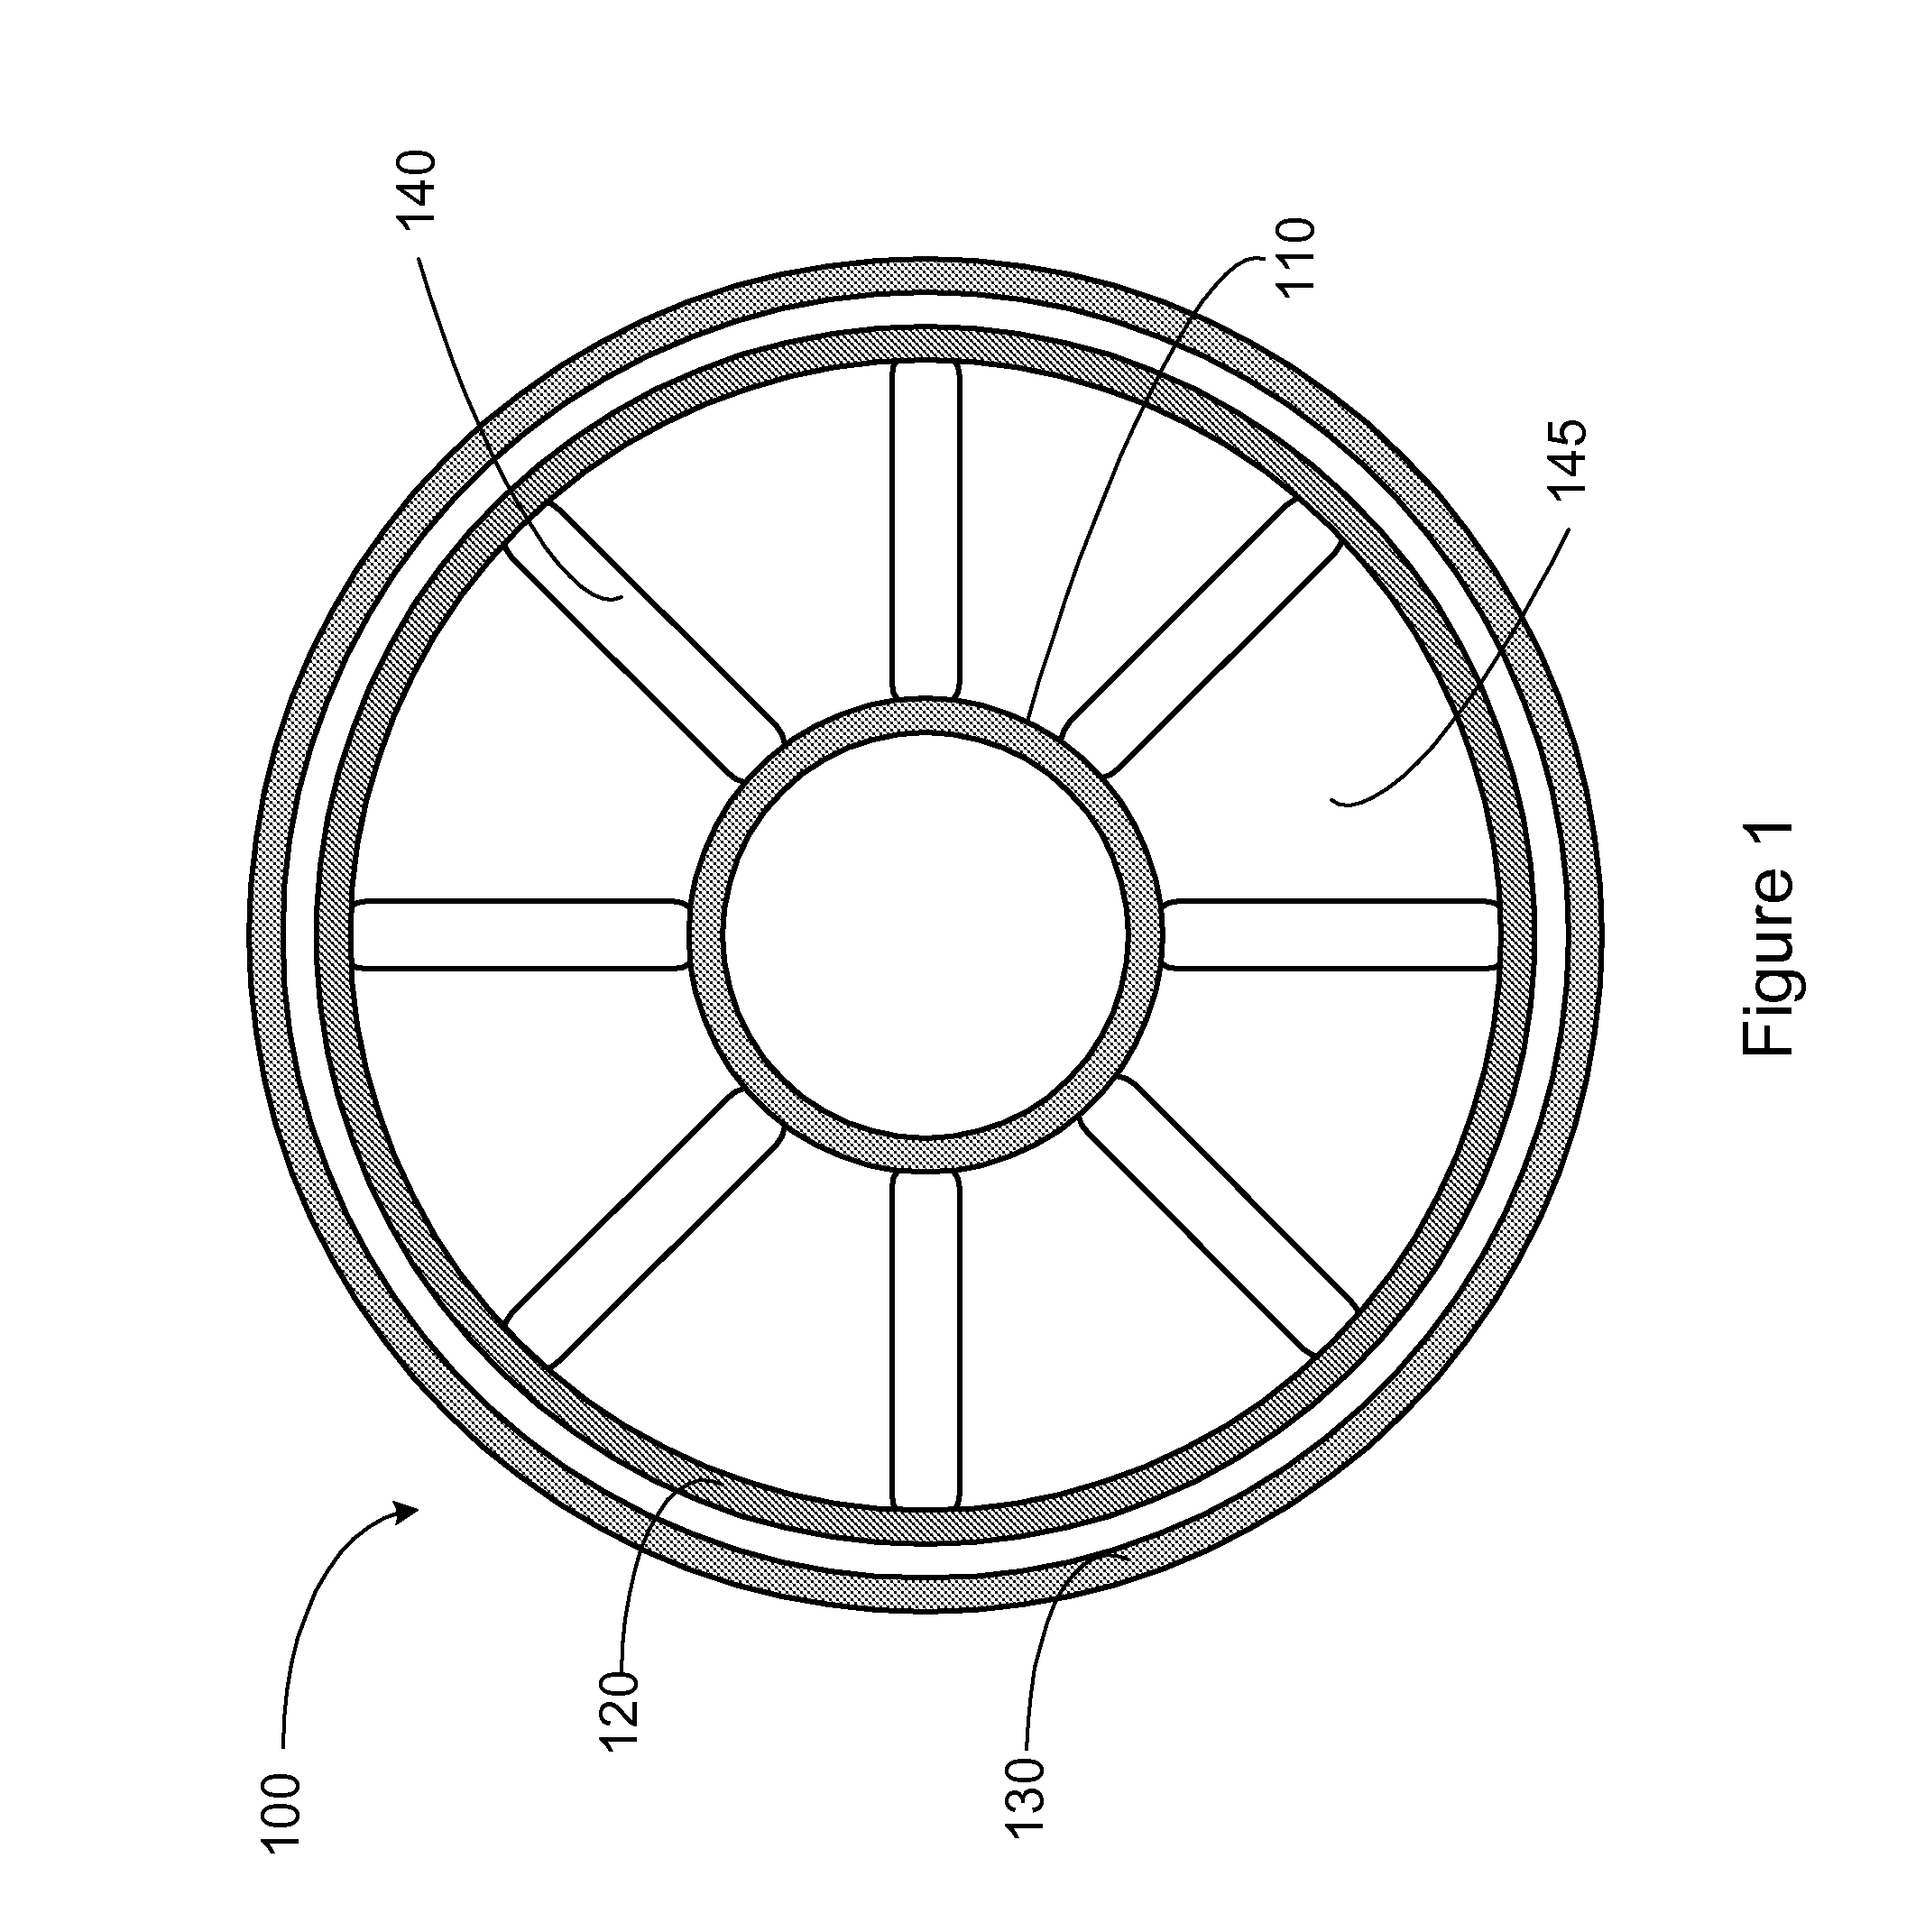 Method, apparatus and system for controlling swirl of exhaust in a gas turbine